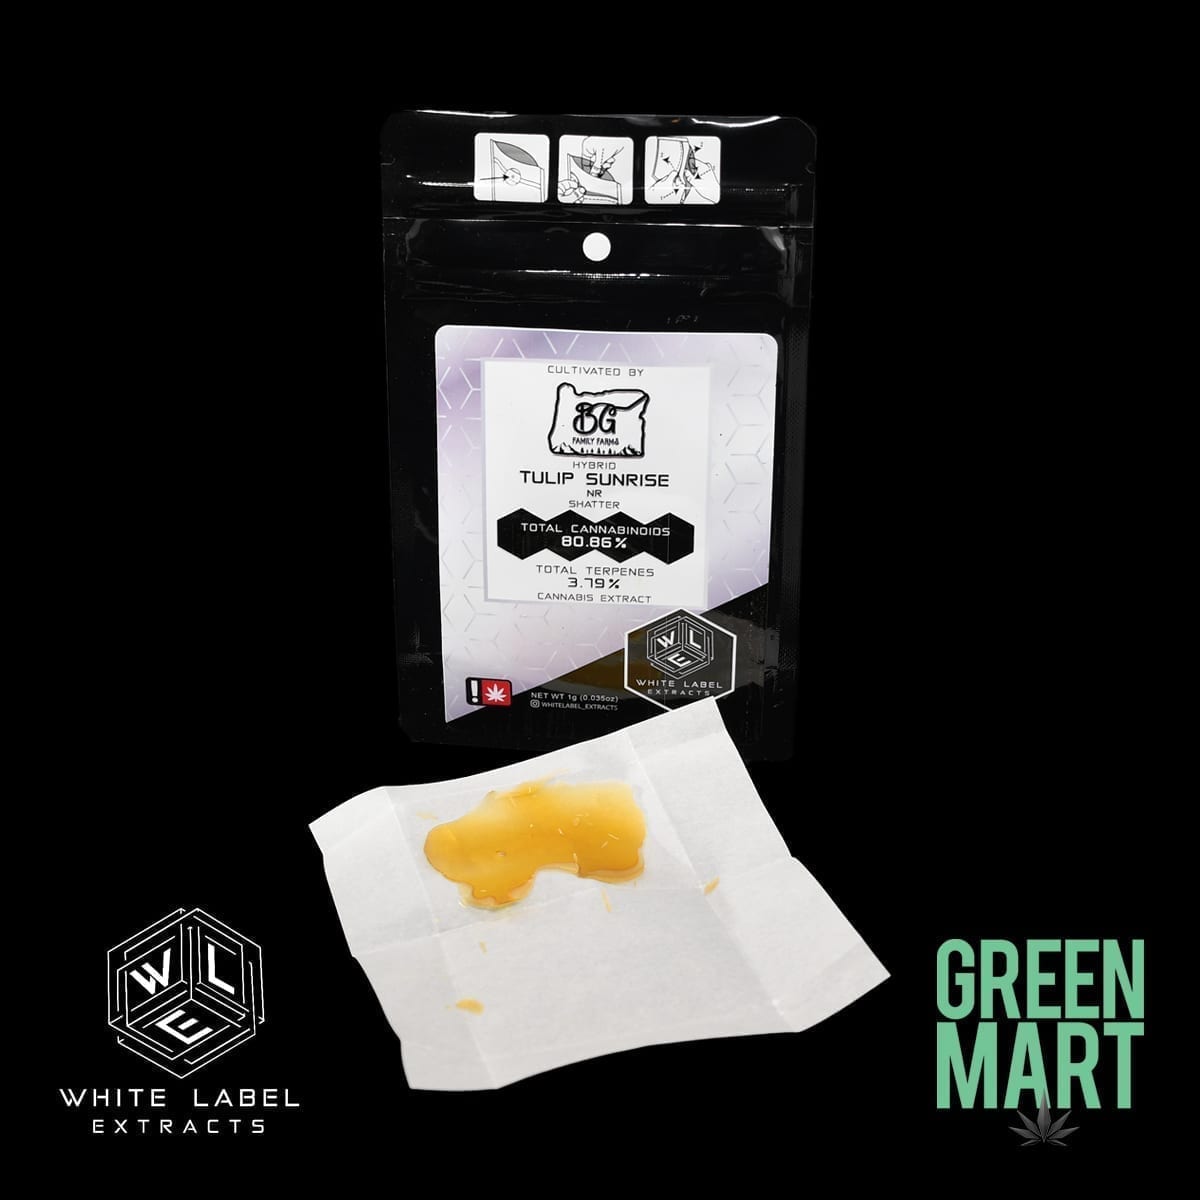 White Label Extracts - Tulip Sunrise Shatter